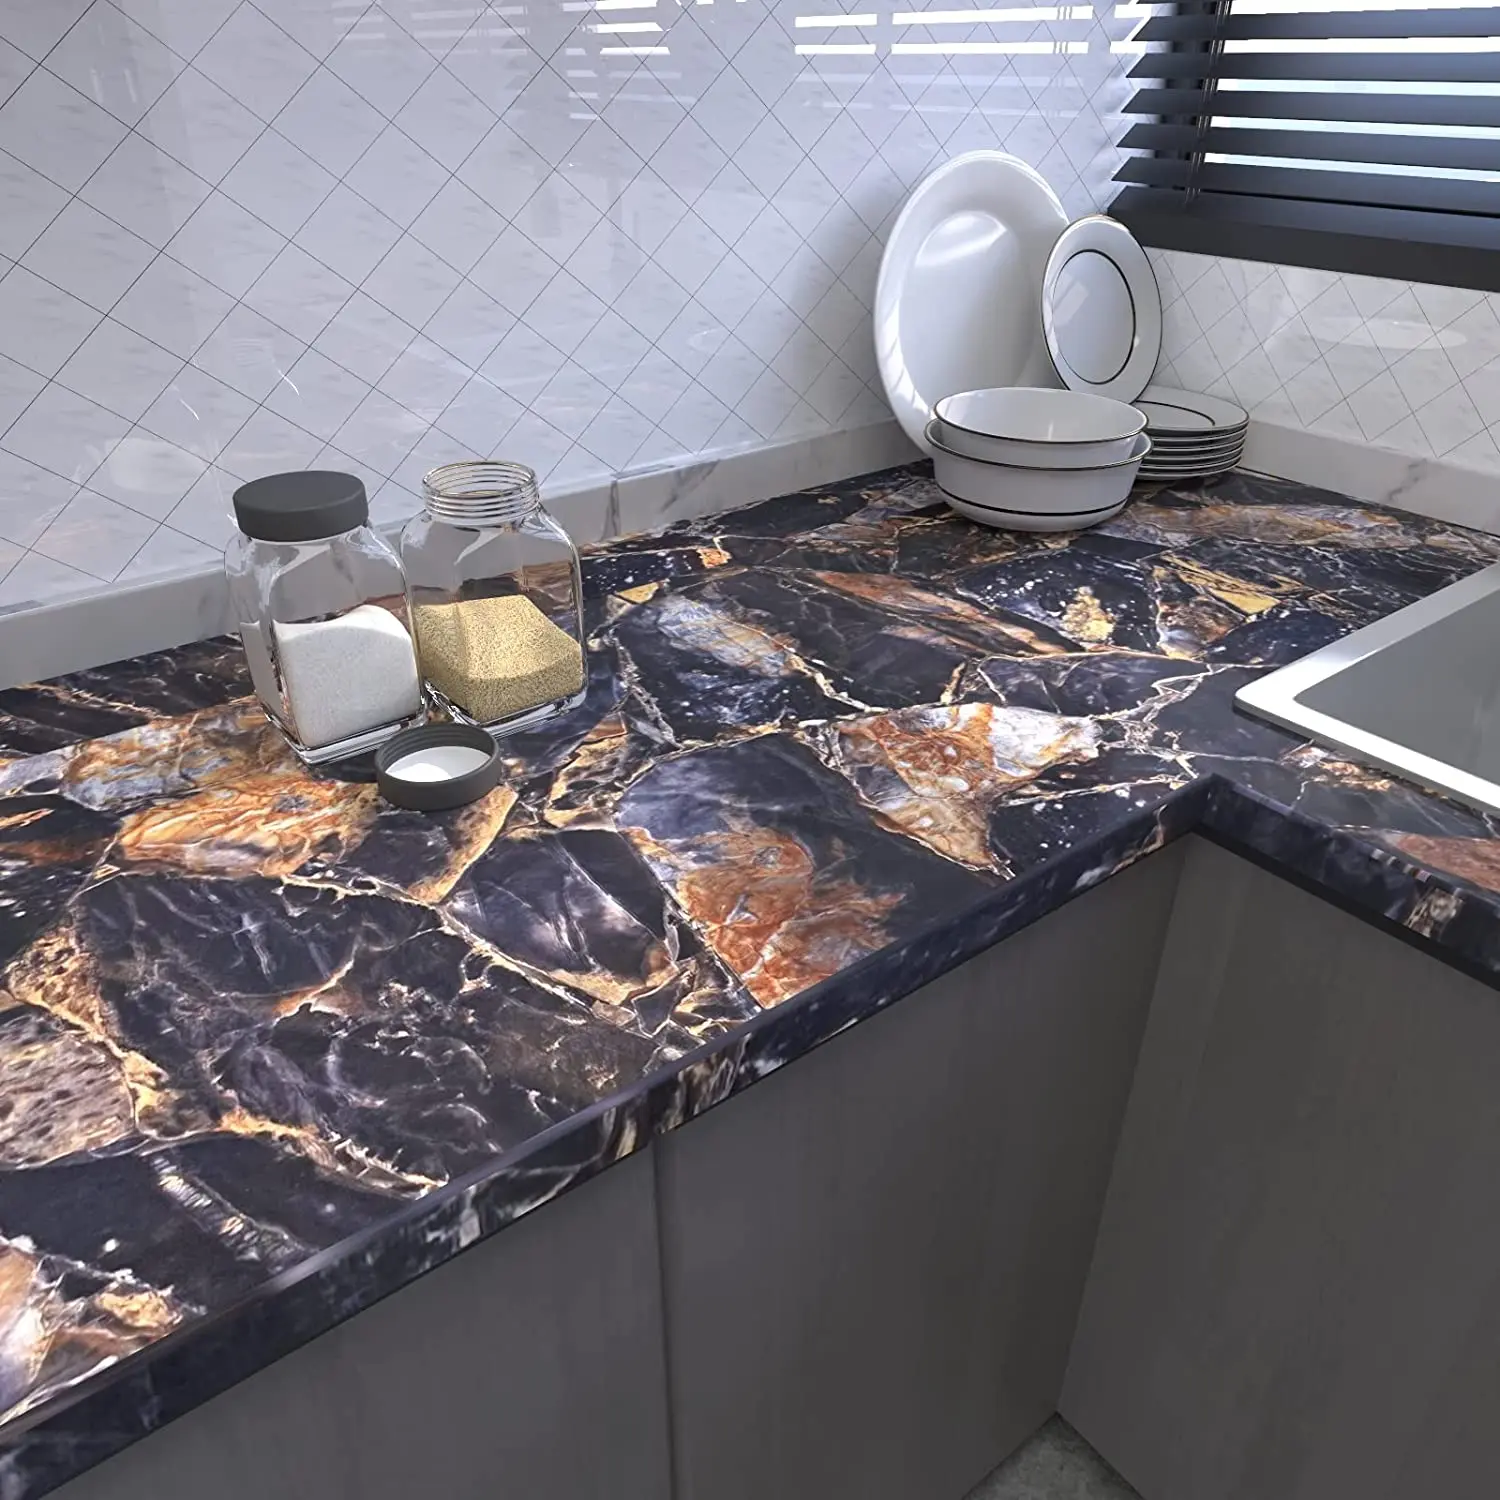 

TTOKK Oil Proof Marble Kitchen Self Adhesive Wallpaper For Counter Table Desk Bathroom PVC Waterproof Peel & Stick Contact Paper